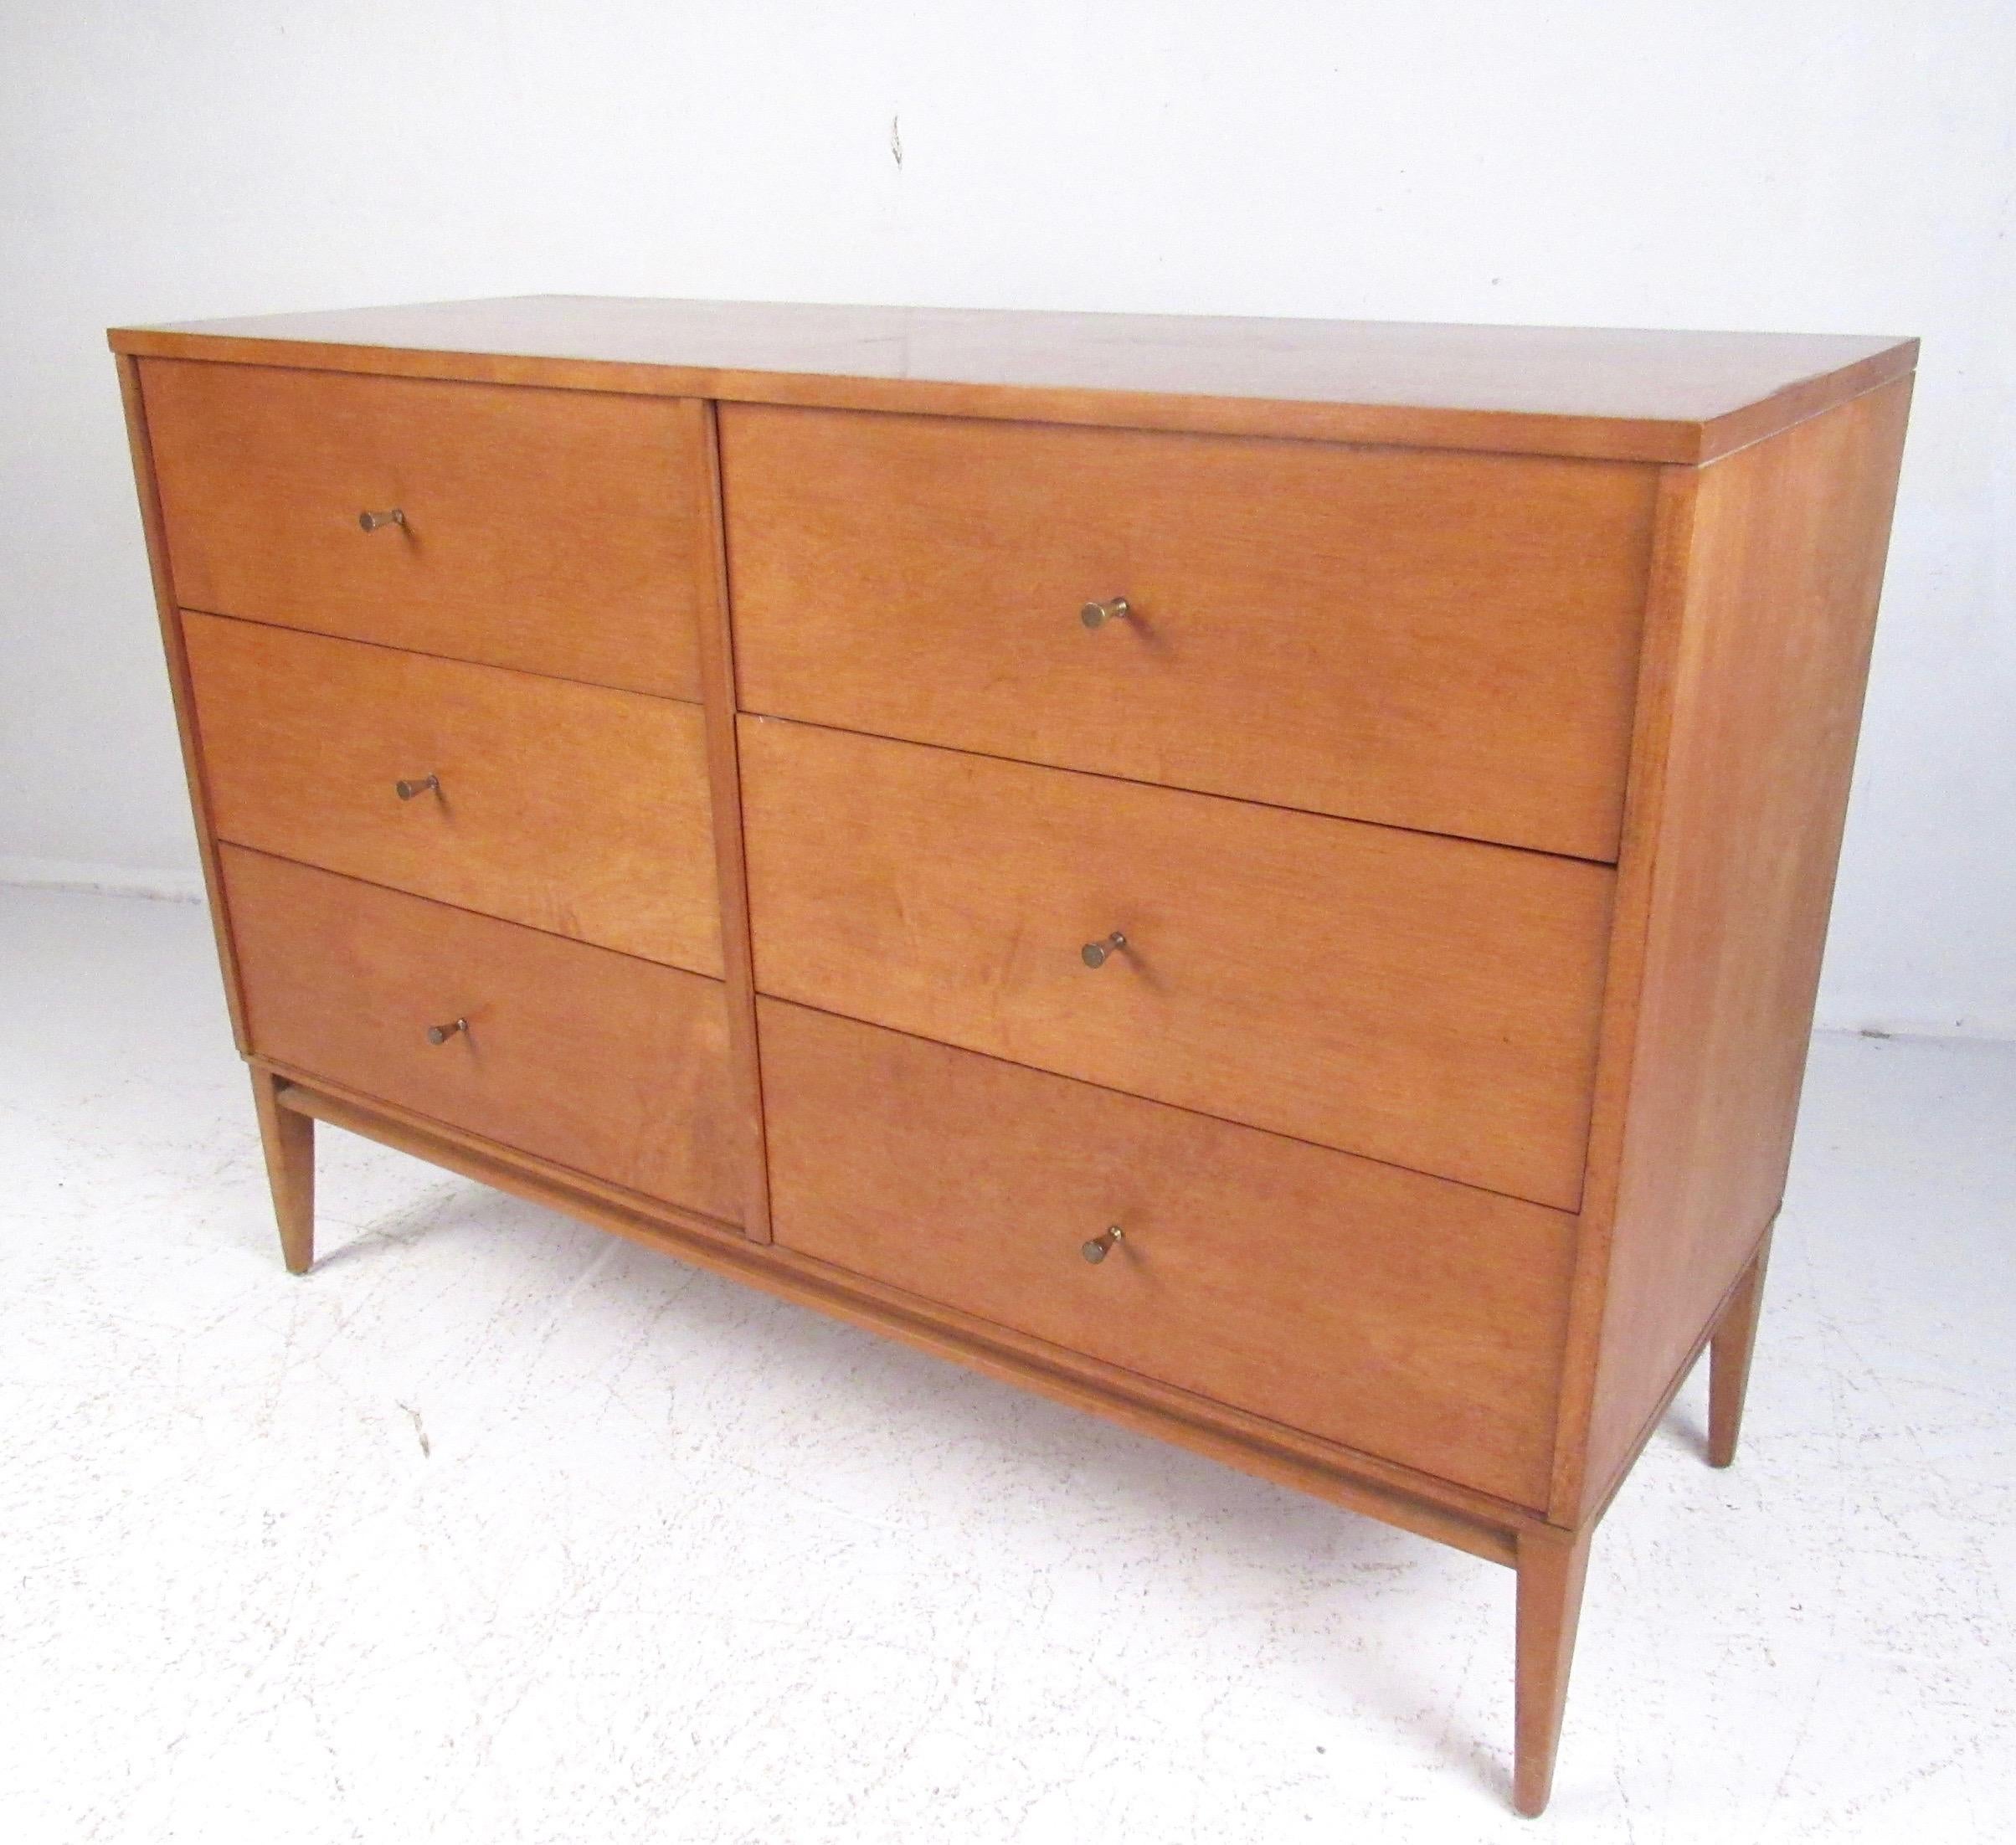 Vintage modern six-drawer bedroom dresser by Paul McCobb features spacious dovetailed drawers, iconic metal drawer pulls, tapered legs, and stylish midcentury maple finish. This Planner Group dresser combines spacious storage in a compact design,